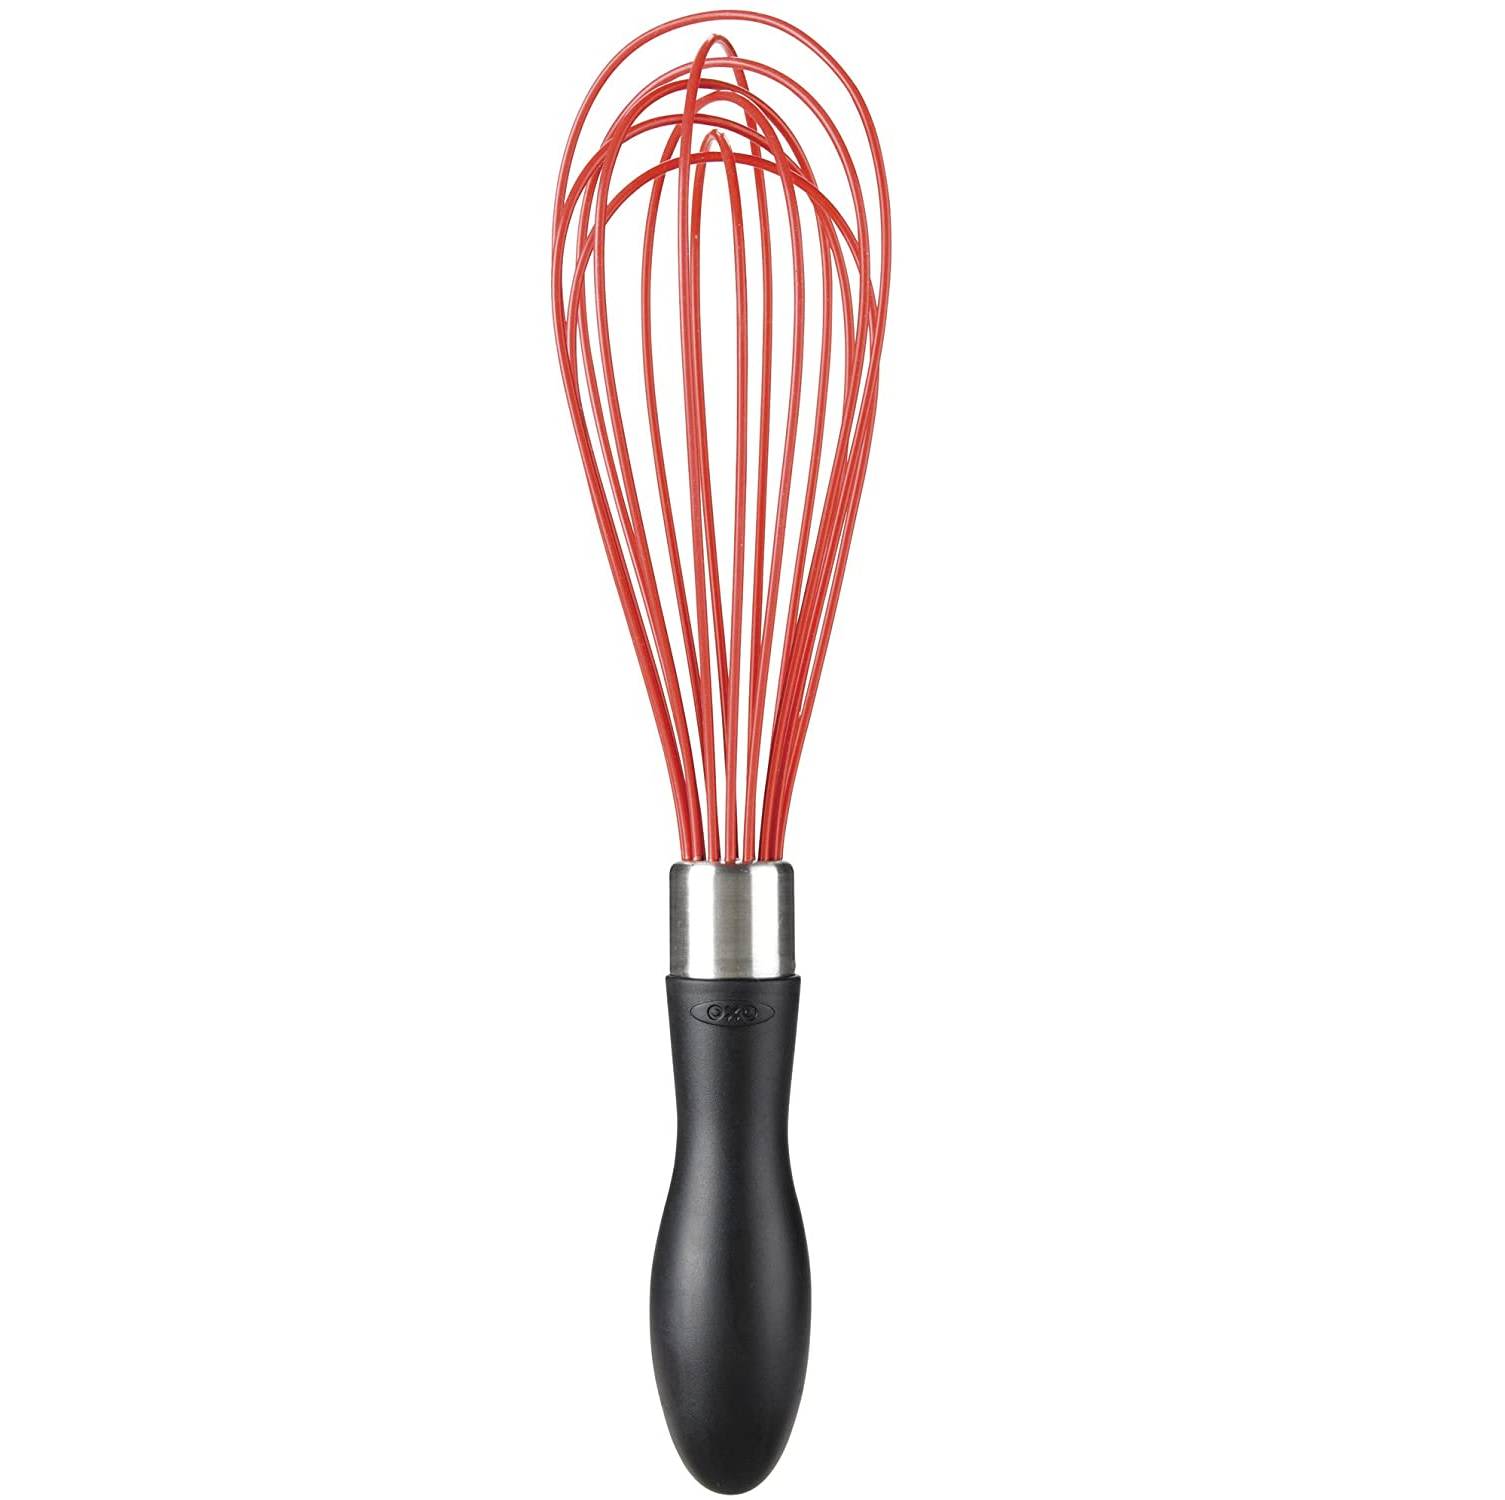 https://cdn.apartmenttherapy.info/image/upload/v1626896767/gen-workflow/product-database/oxo_silicone_balloon_whisk.jpg